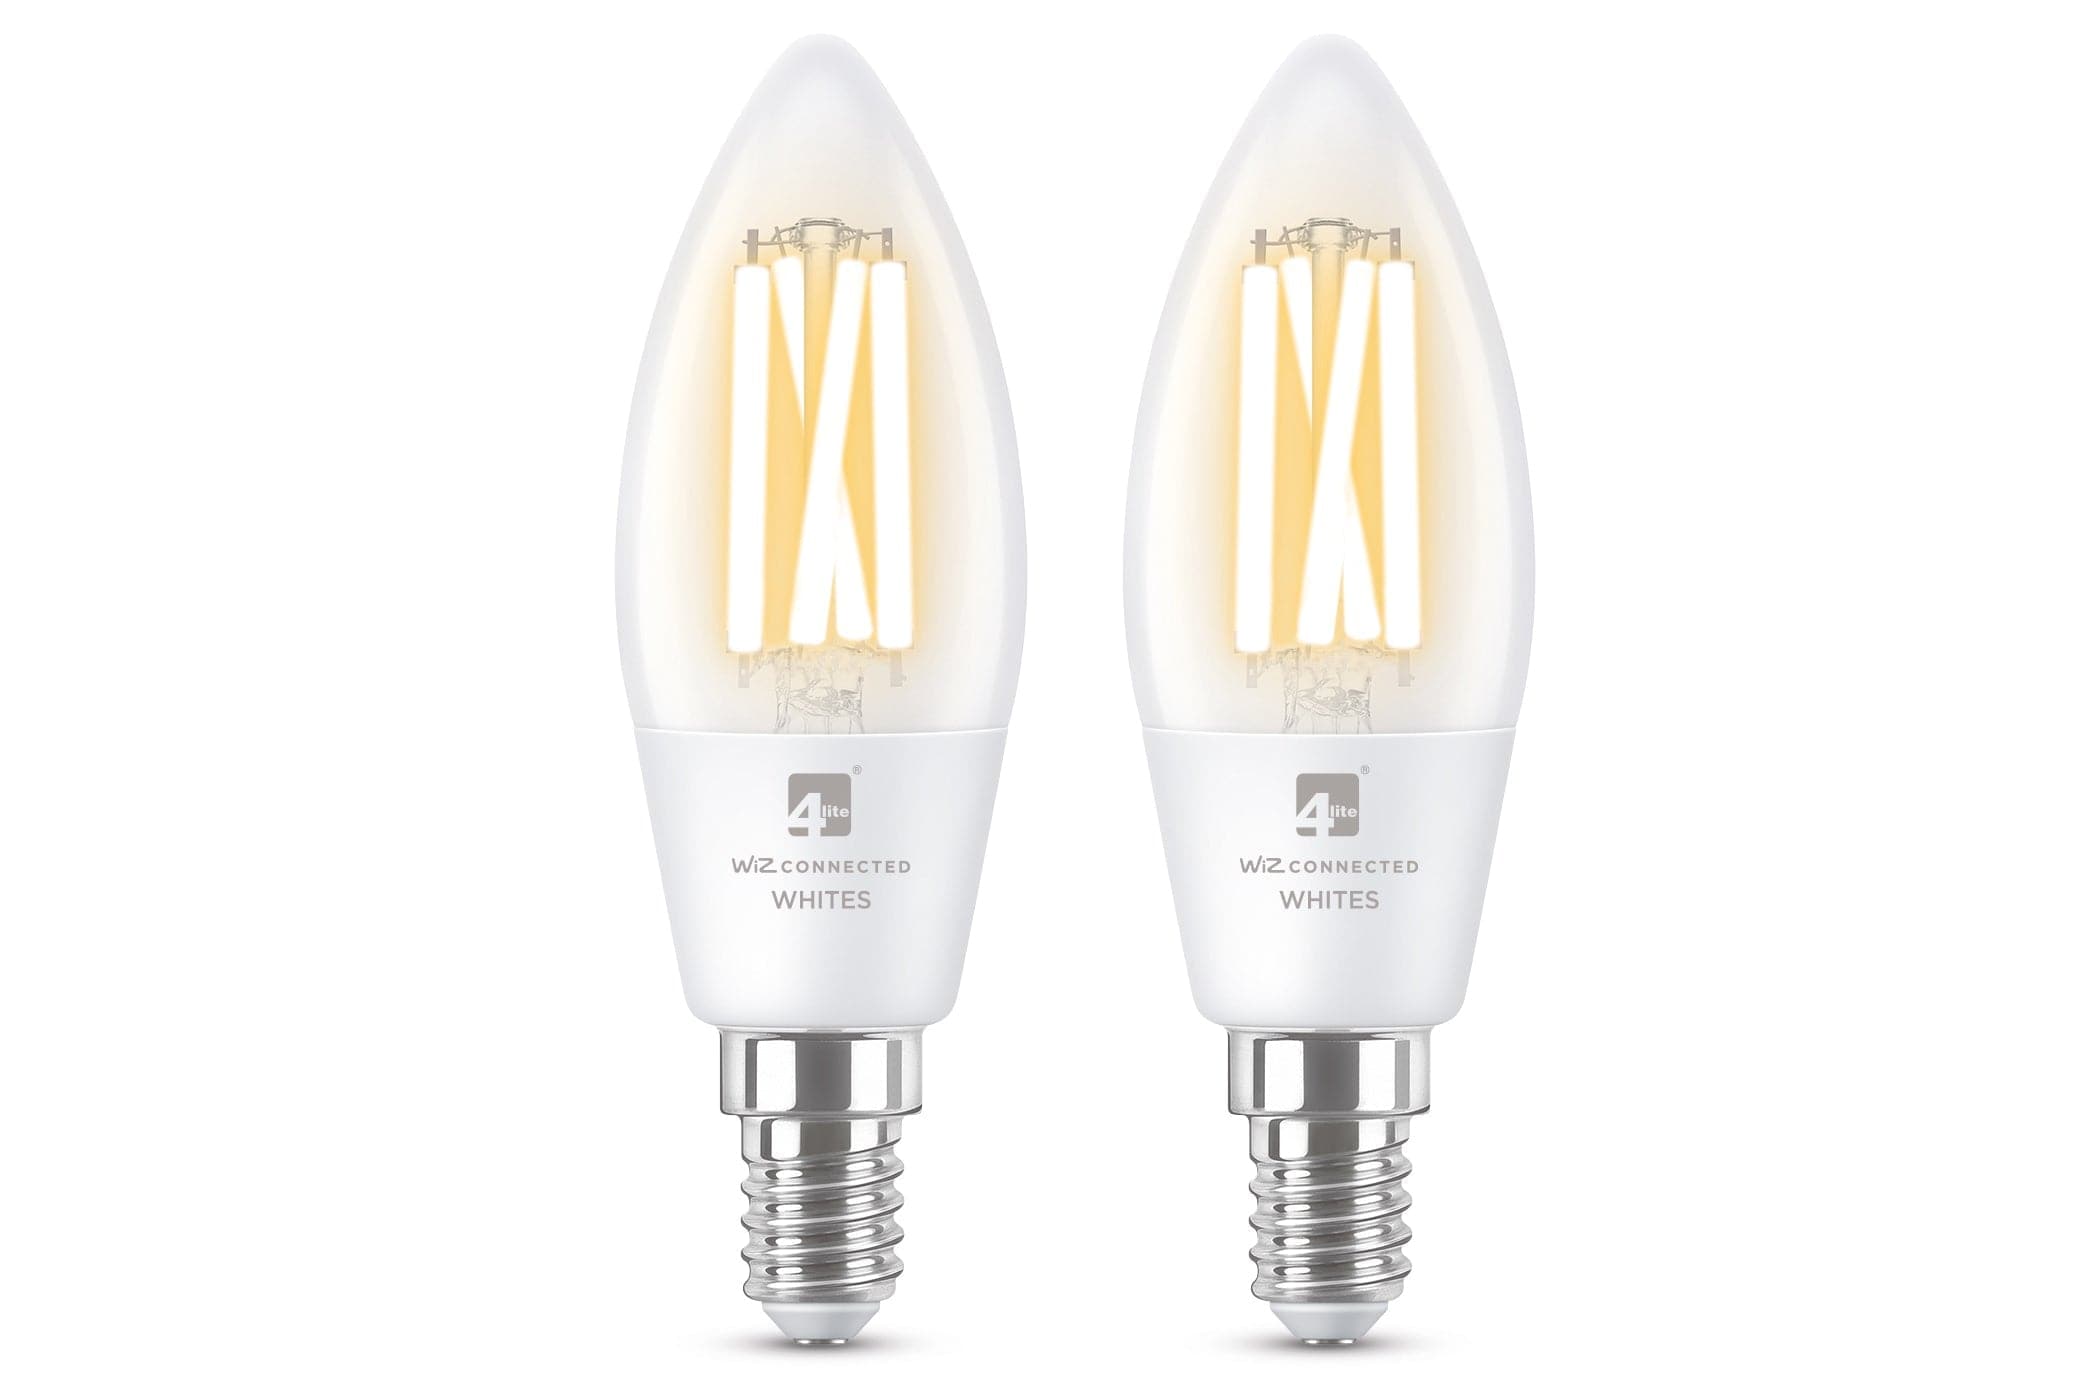 4lite WiZ Connected C35 Candle Filament White WiFi LED Smart Bulb - E14 Small Screw (Pack of 2)